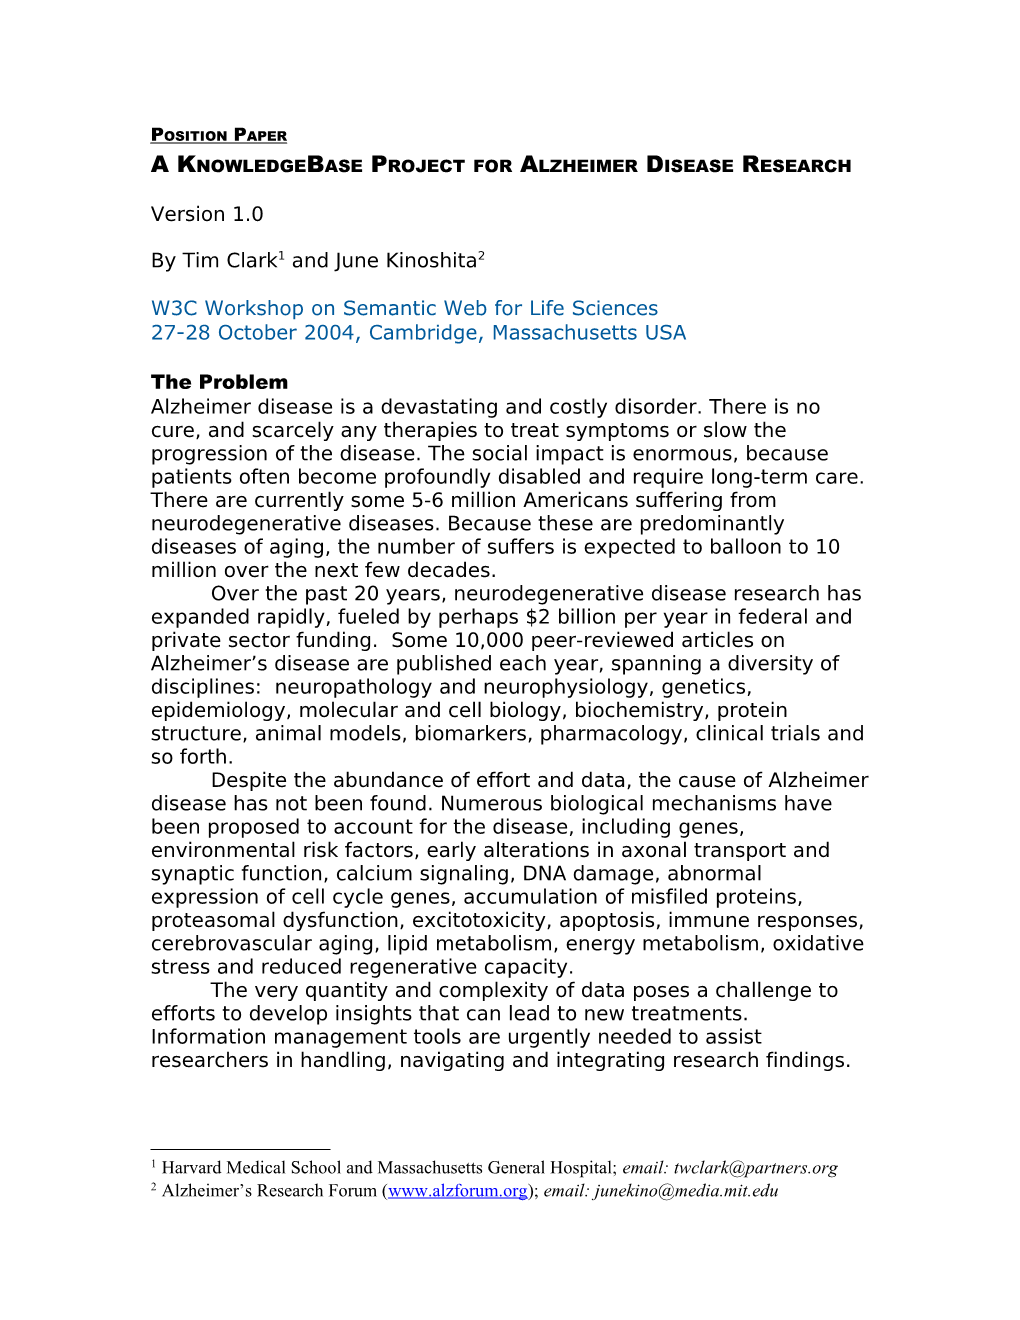 Position Paper: a Knowledgebase Project for Alzheimer Disease Research